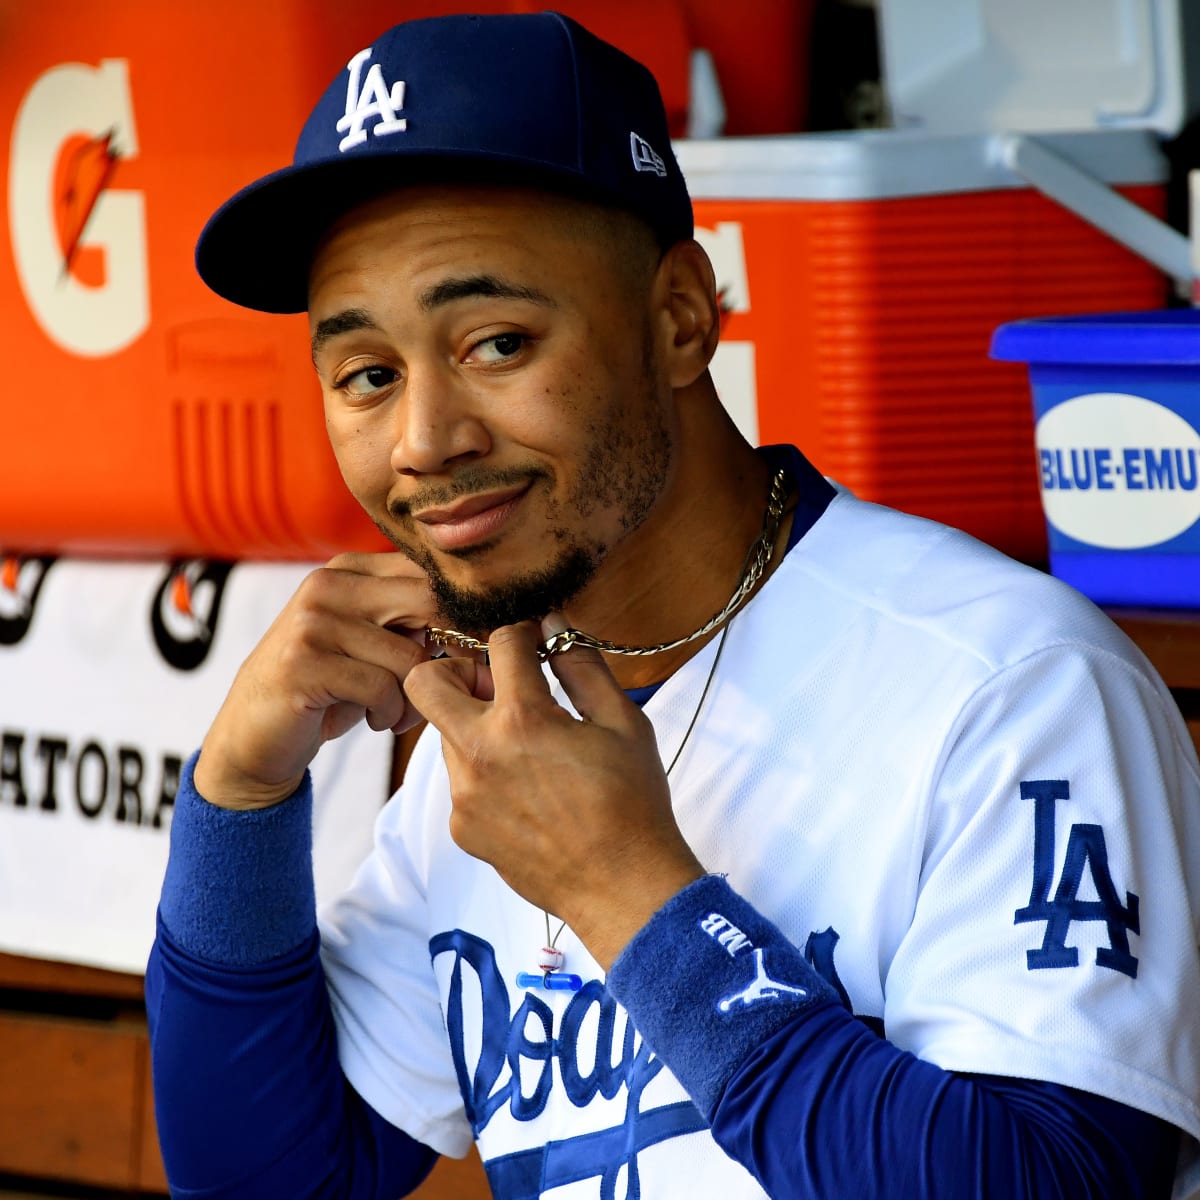 Dodgers star Mookie Betts, locked in during MLB lockout, bowls a